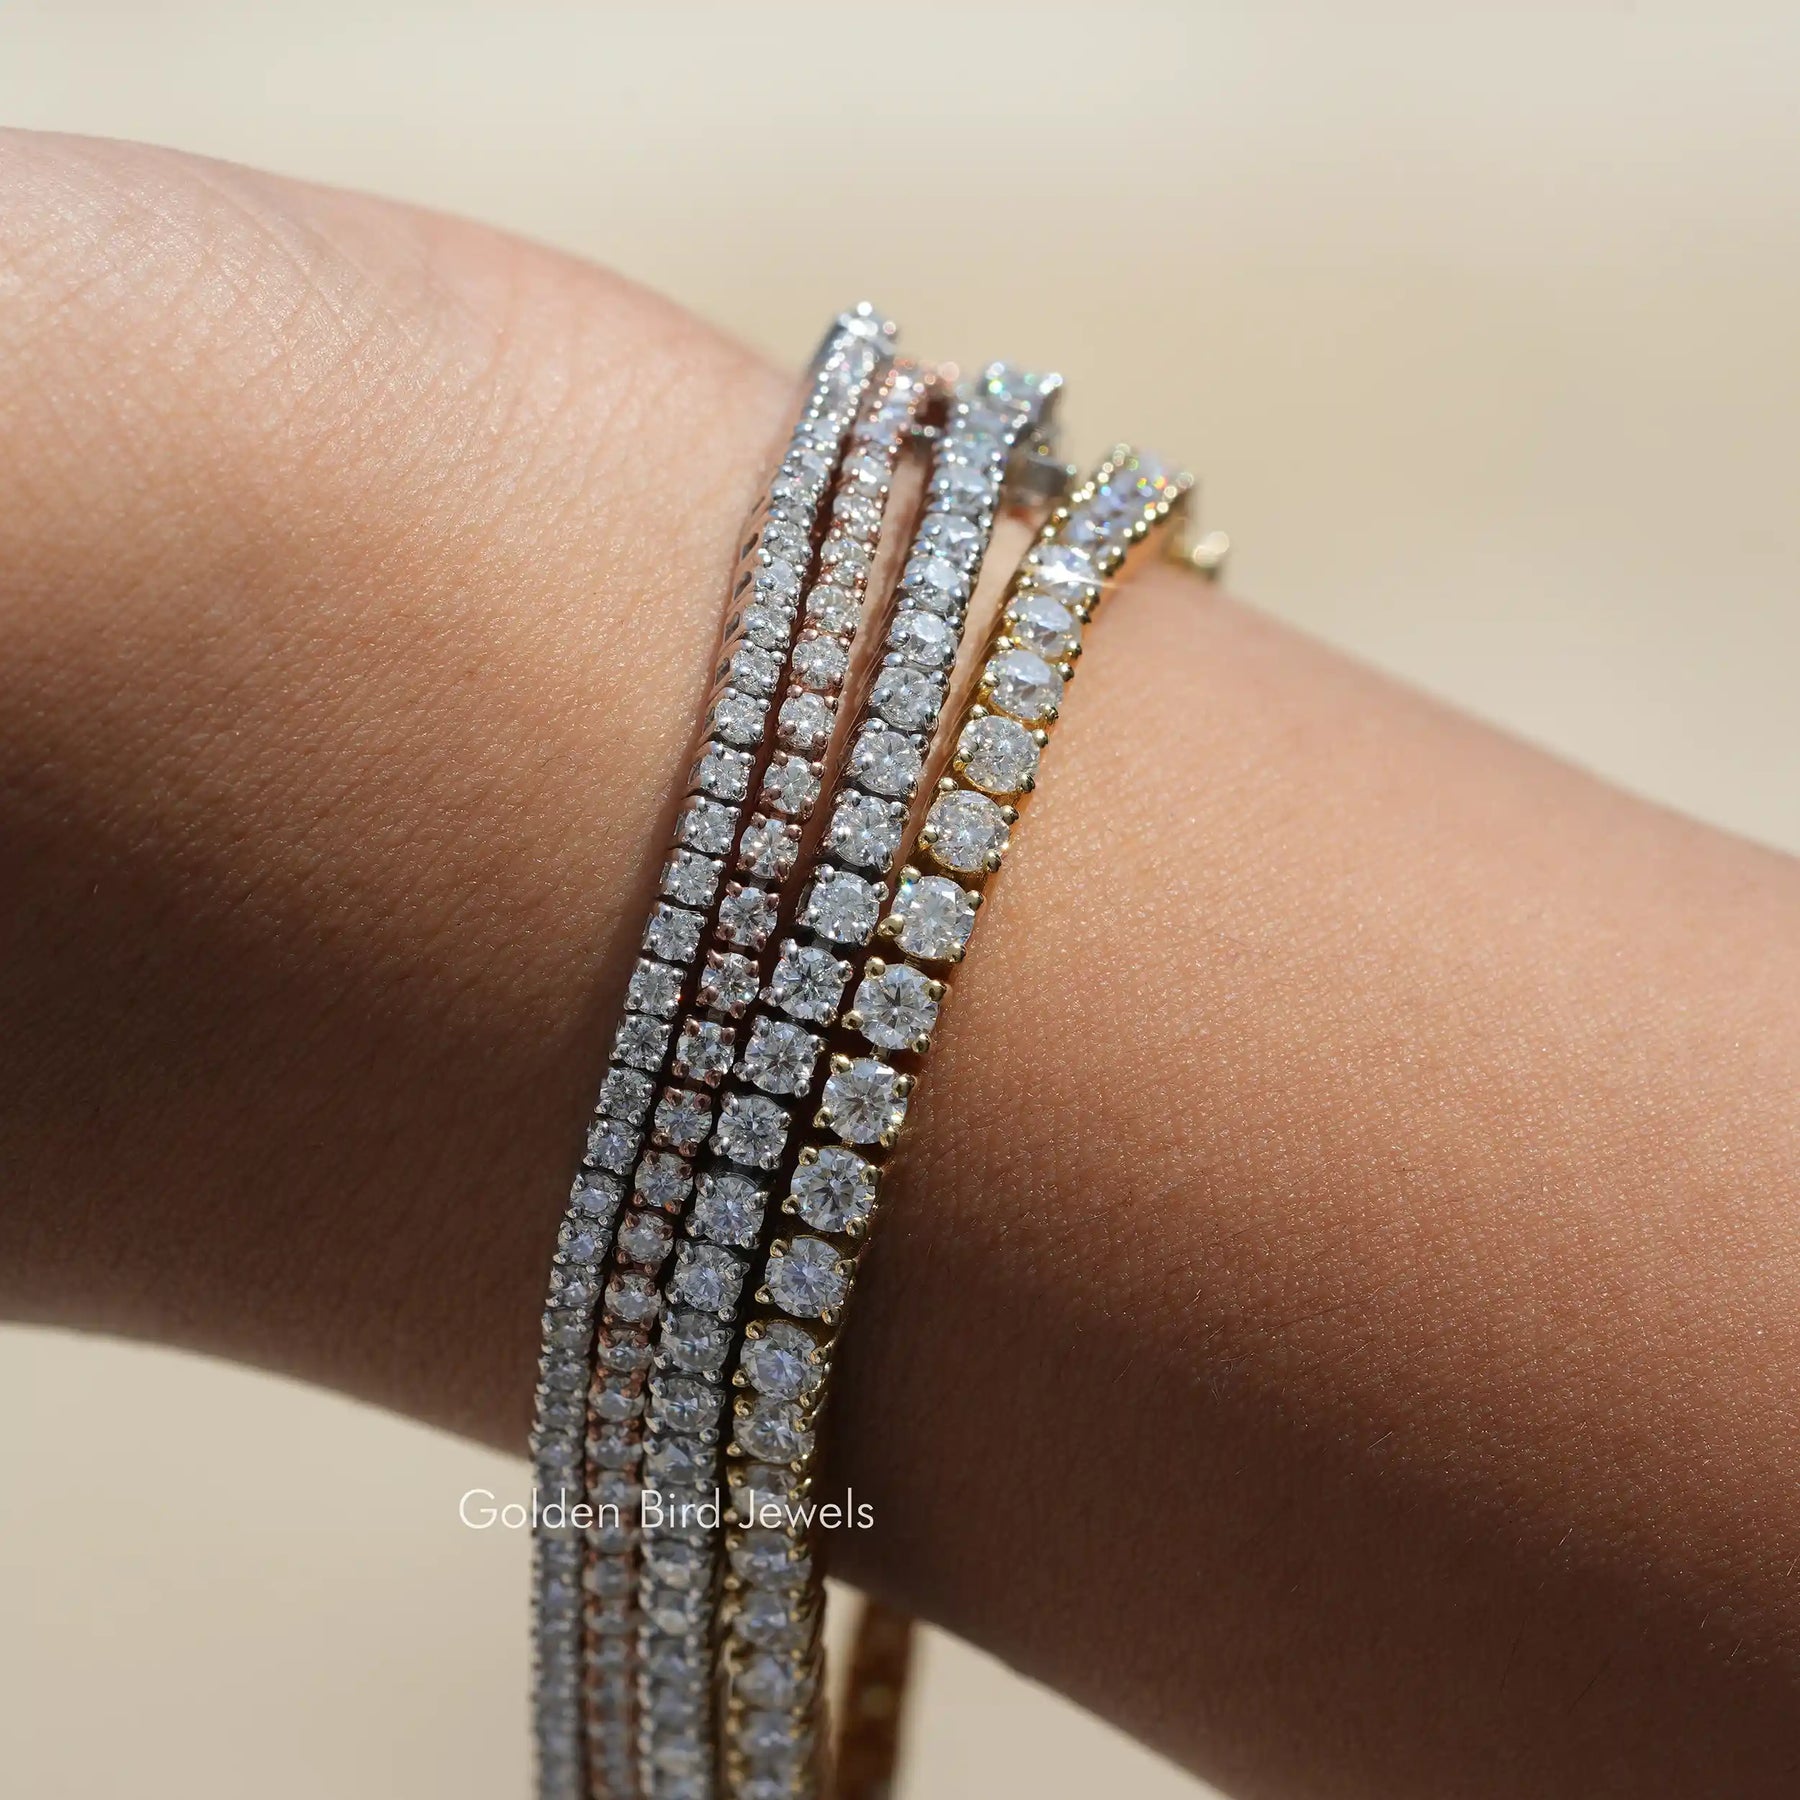 [This moissanite round cut wedding tennis bracelet available in yellow, white & rose gold]-[Golden Bird Jewels]